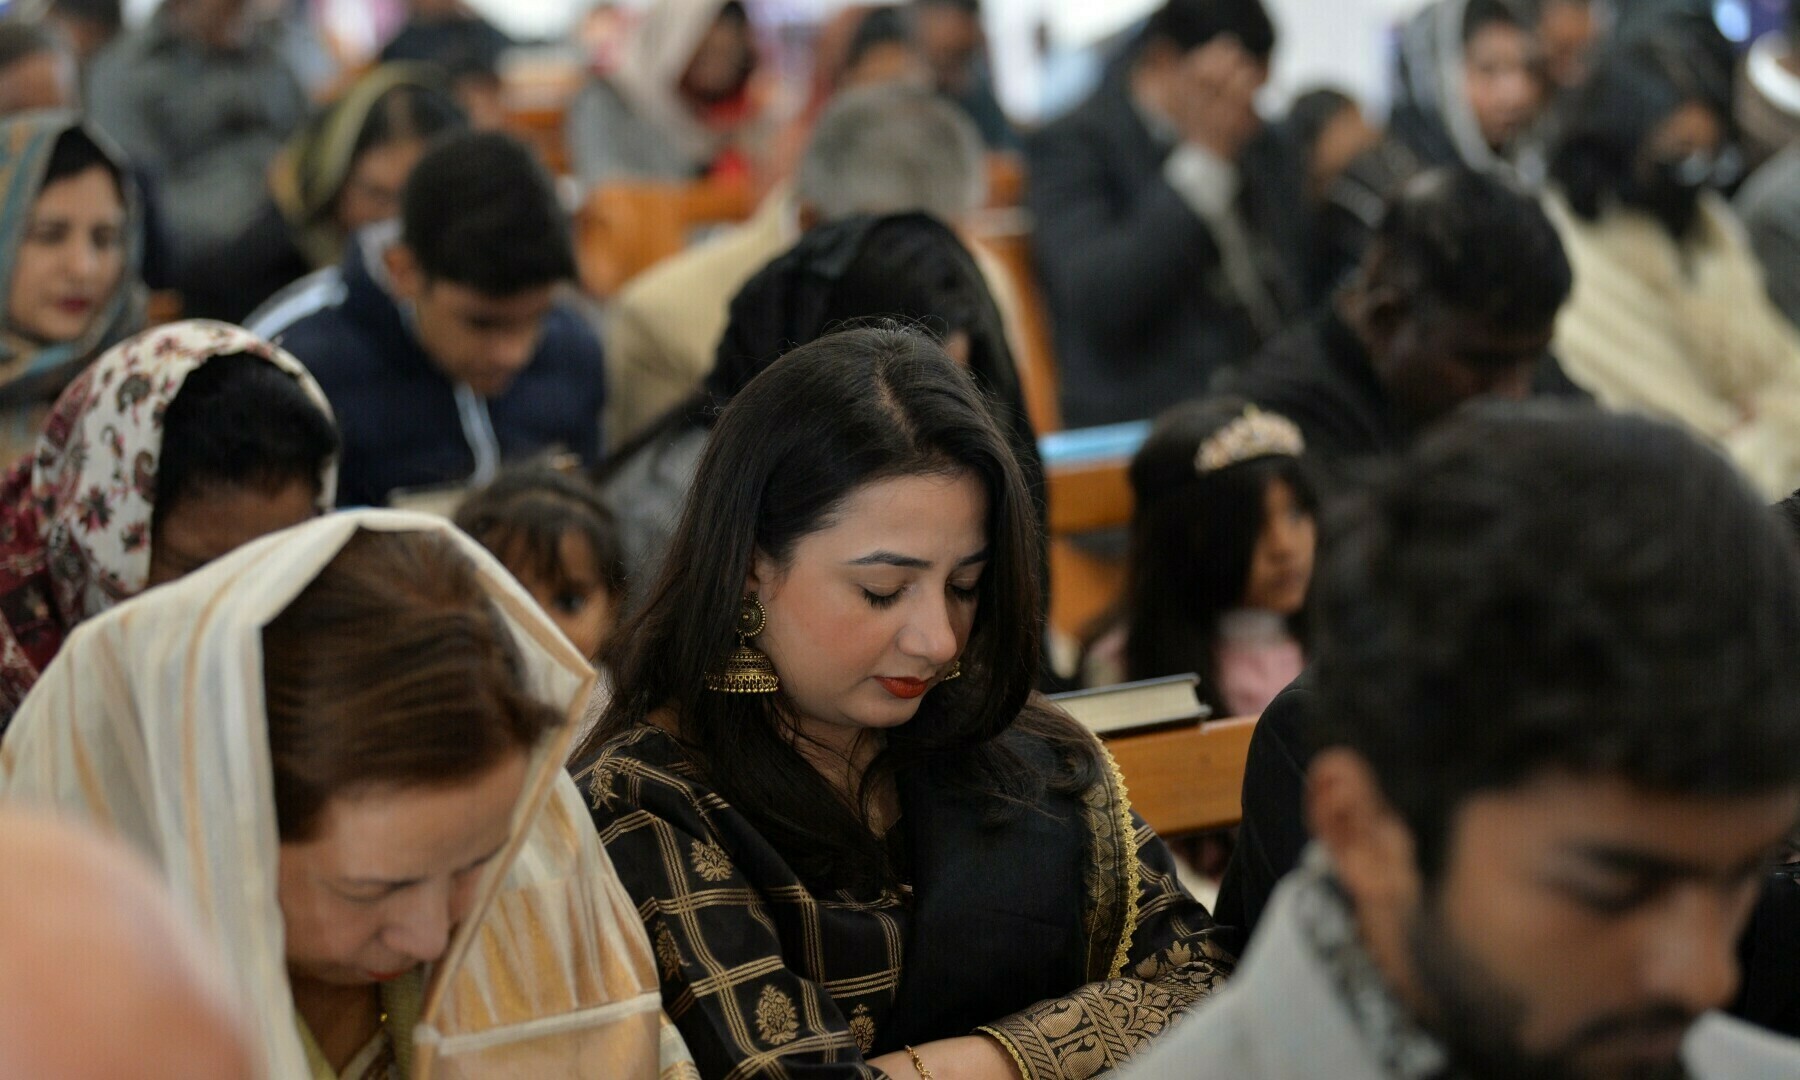 Christian devotees take part in a Christmas prayer at the Christ Church in Rawalpindi on December 25, 2022. — AFP